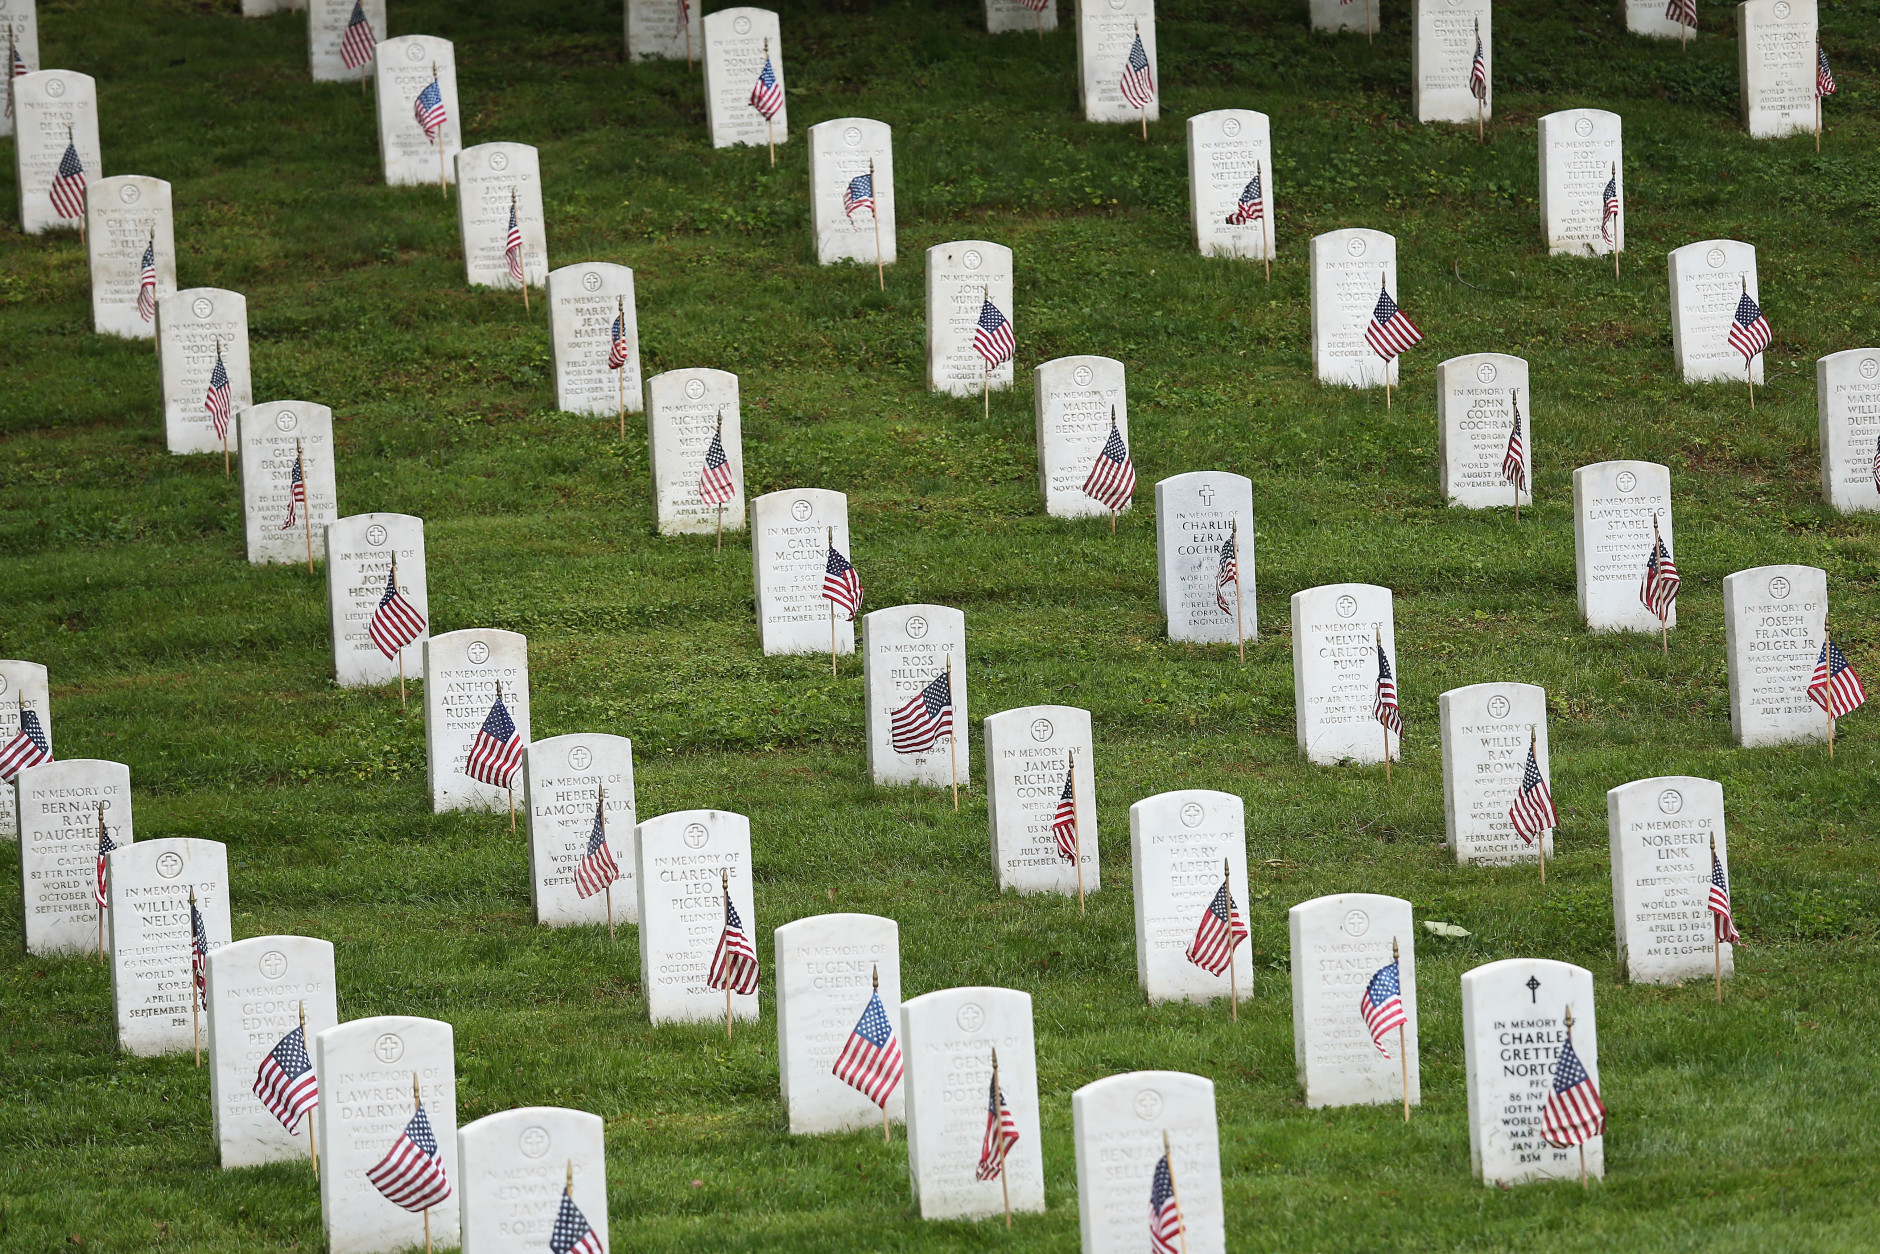 ARLINGTON, VA - MAY 21:  American flags placed by members of the 3rd U.S. Infantry Regiment at the graves of U.S. soldiers buried at Arlington National Cemetery in preparation for Memorial Day are seen May 21, 2015 in Arlington, Virginia. 'Flags-In' has become an annual ceremony since the 3rd U.S. Infantry Regiment (The Old Guard) was designated to be an Army's official ceremonial unit in 1948.  (Photo by Win McNamee/Getty Images)